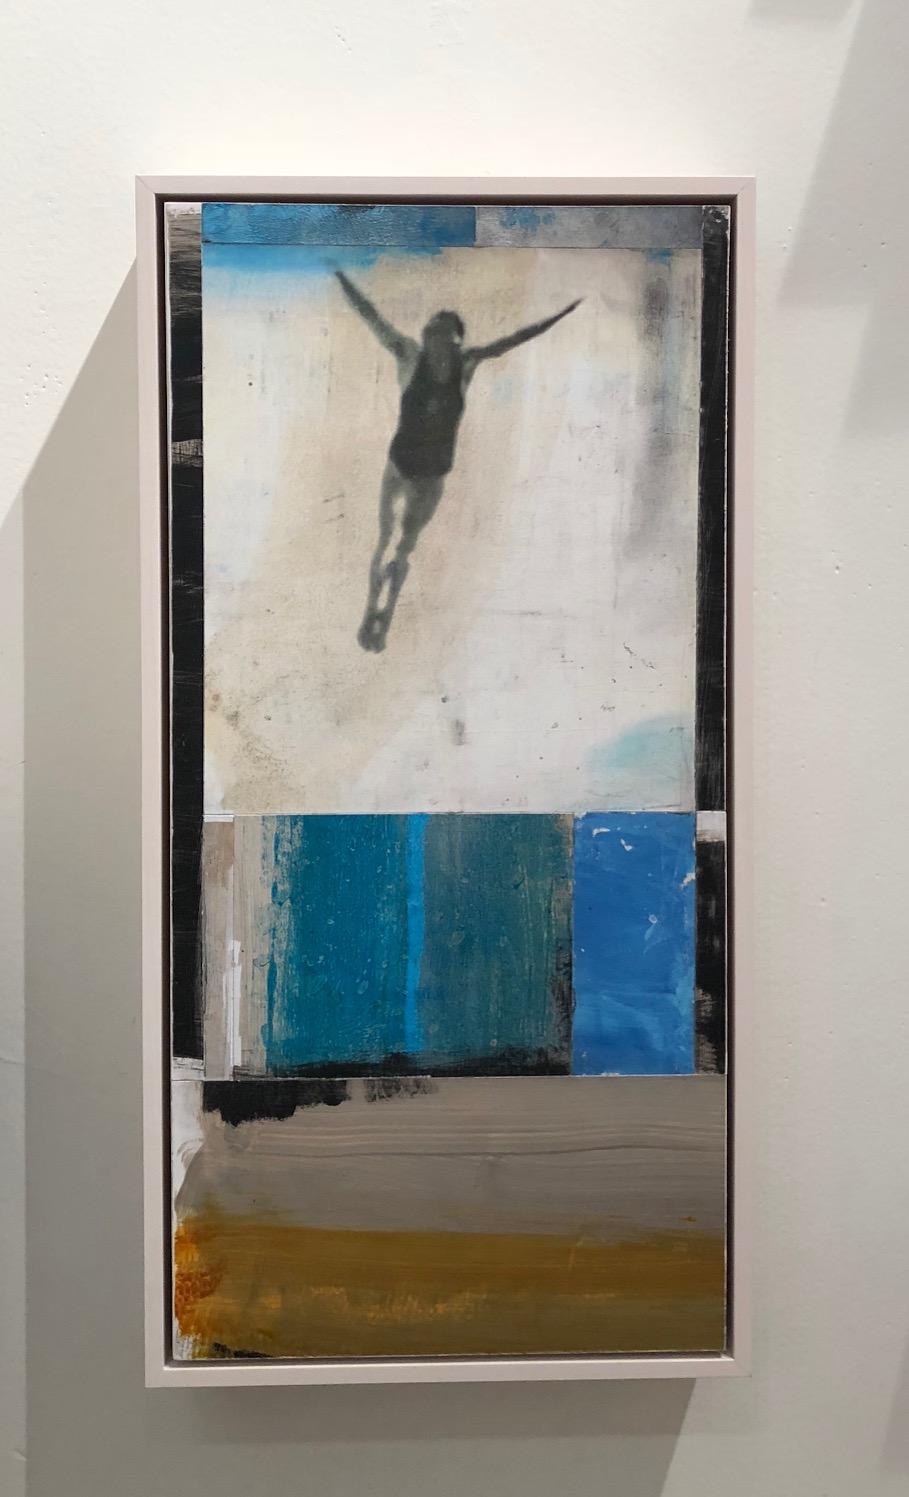 Free Falling: For T.P.. - Contemporary Mixed Media Art by Kim Frohsin